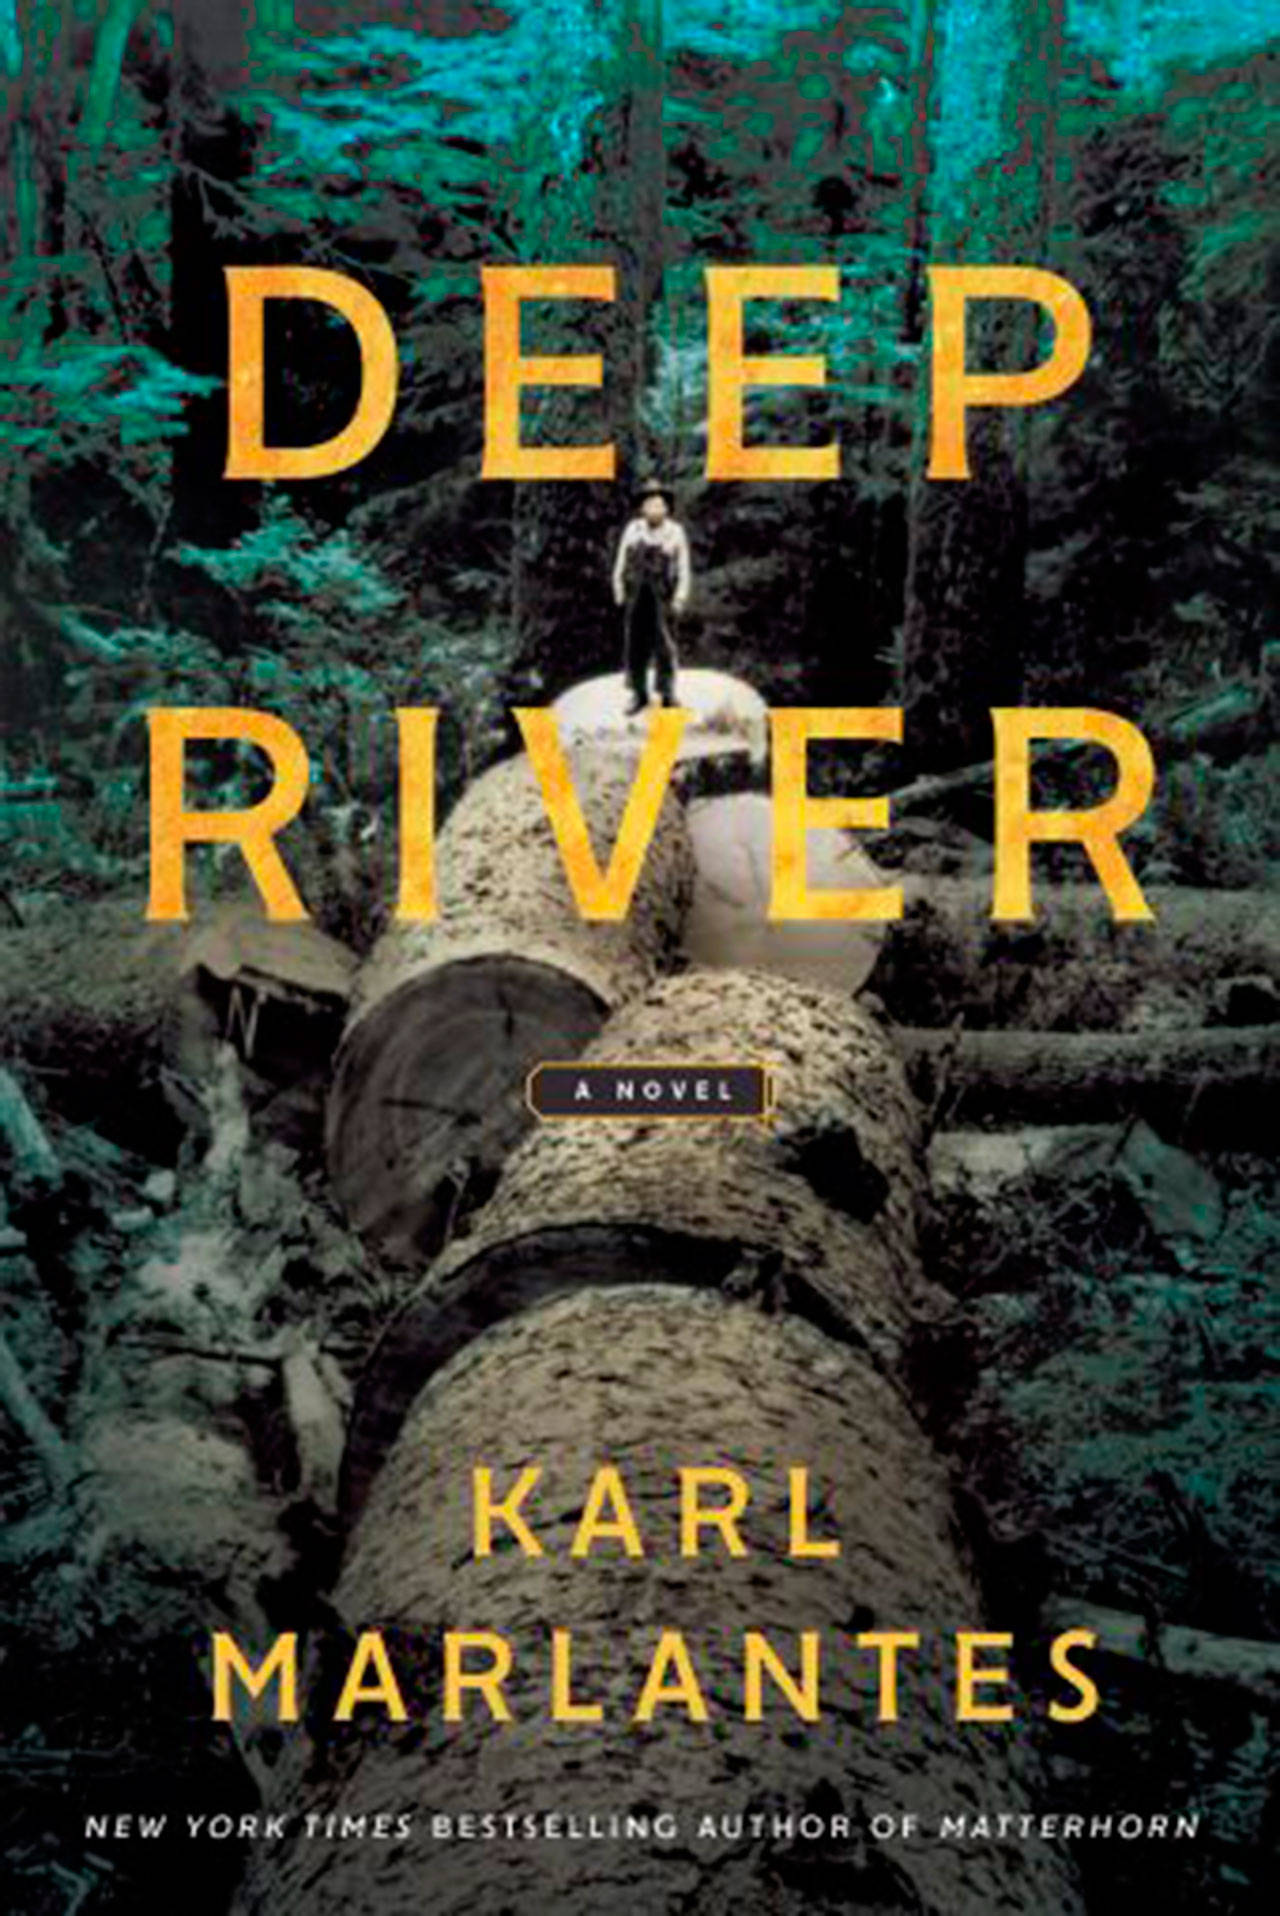 Image courtesy of Eagle Harbor Book Company | Washington author Karl Marlantes will visit Eagle Harbor Book Company at 7 p.m. Thursday, July 18 to celebrate the release of his newest work, “Deep River.”